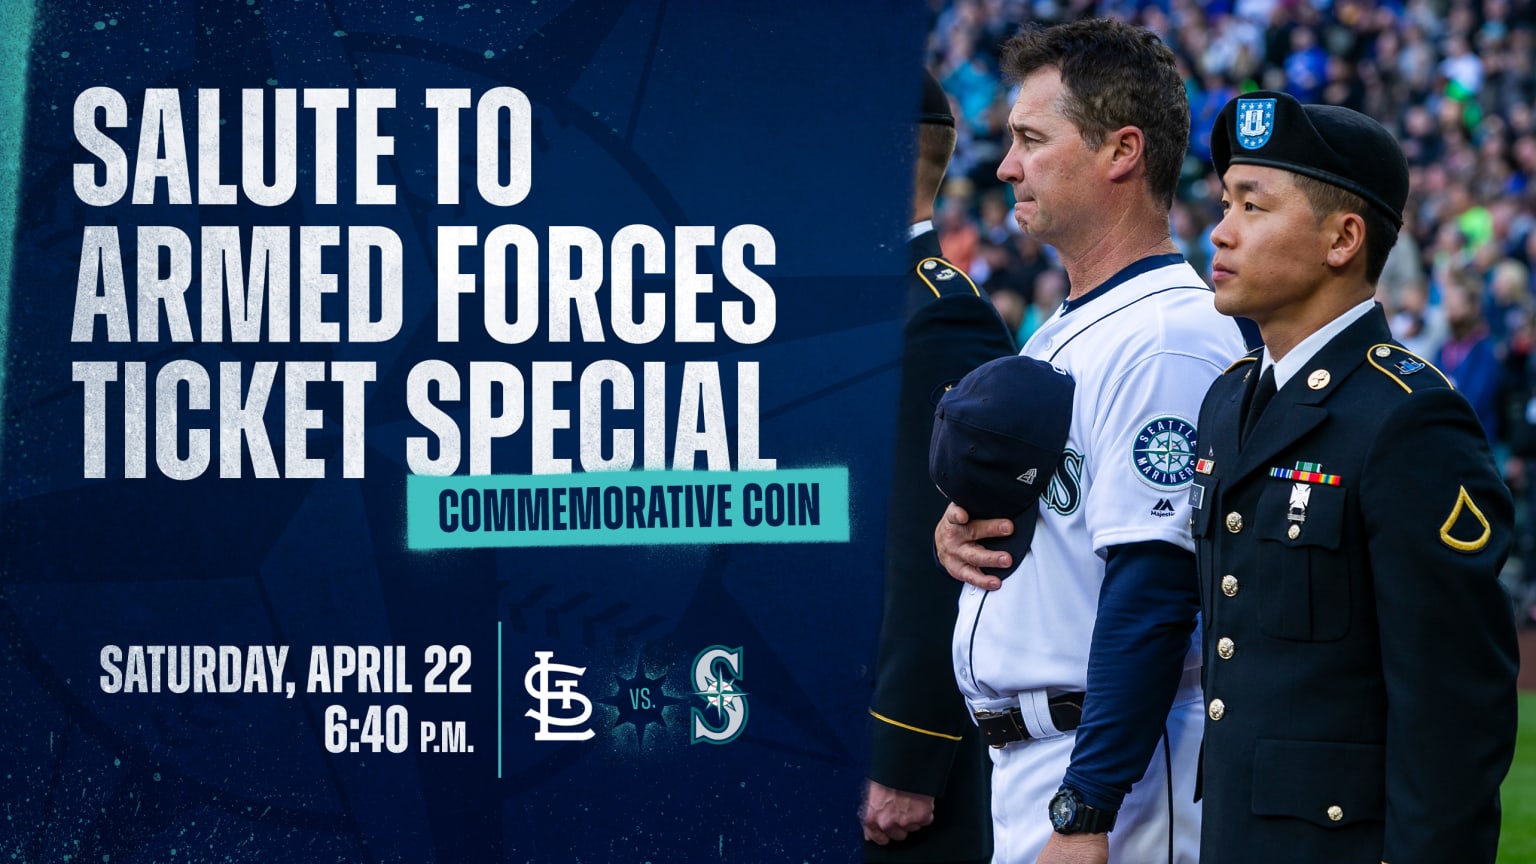 Seattle Mariners - Spring Training tickets go on sale Monday, November 28!  🌵☀️ Get early access by signing up for Mariners Mail at Mariners.com/Mail  or by texting 'MARINERS' to 24247, and view